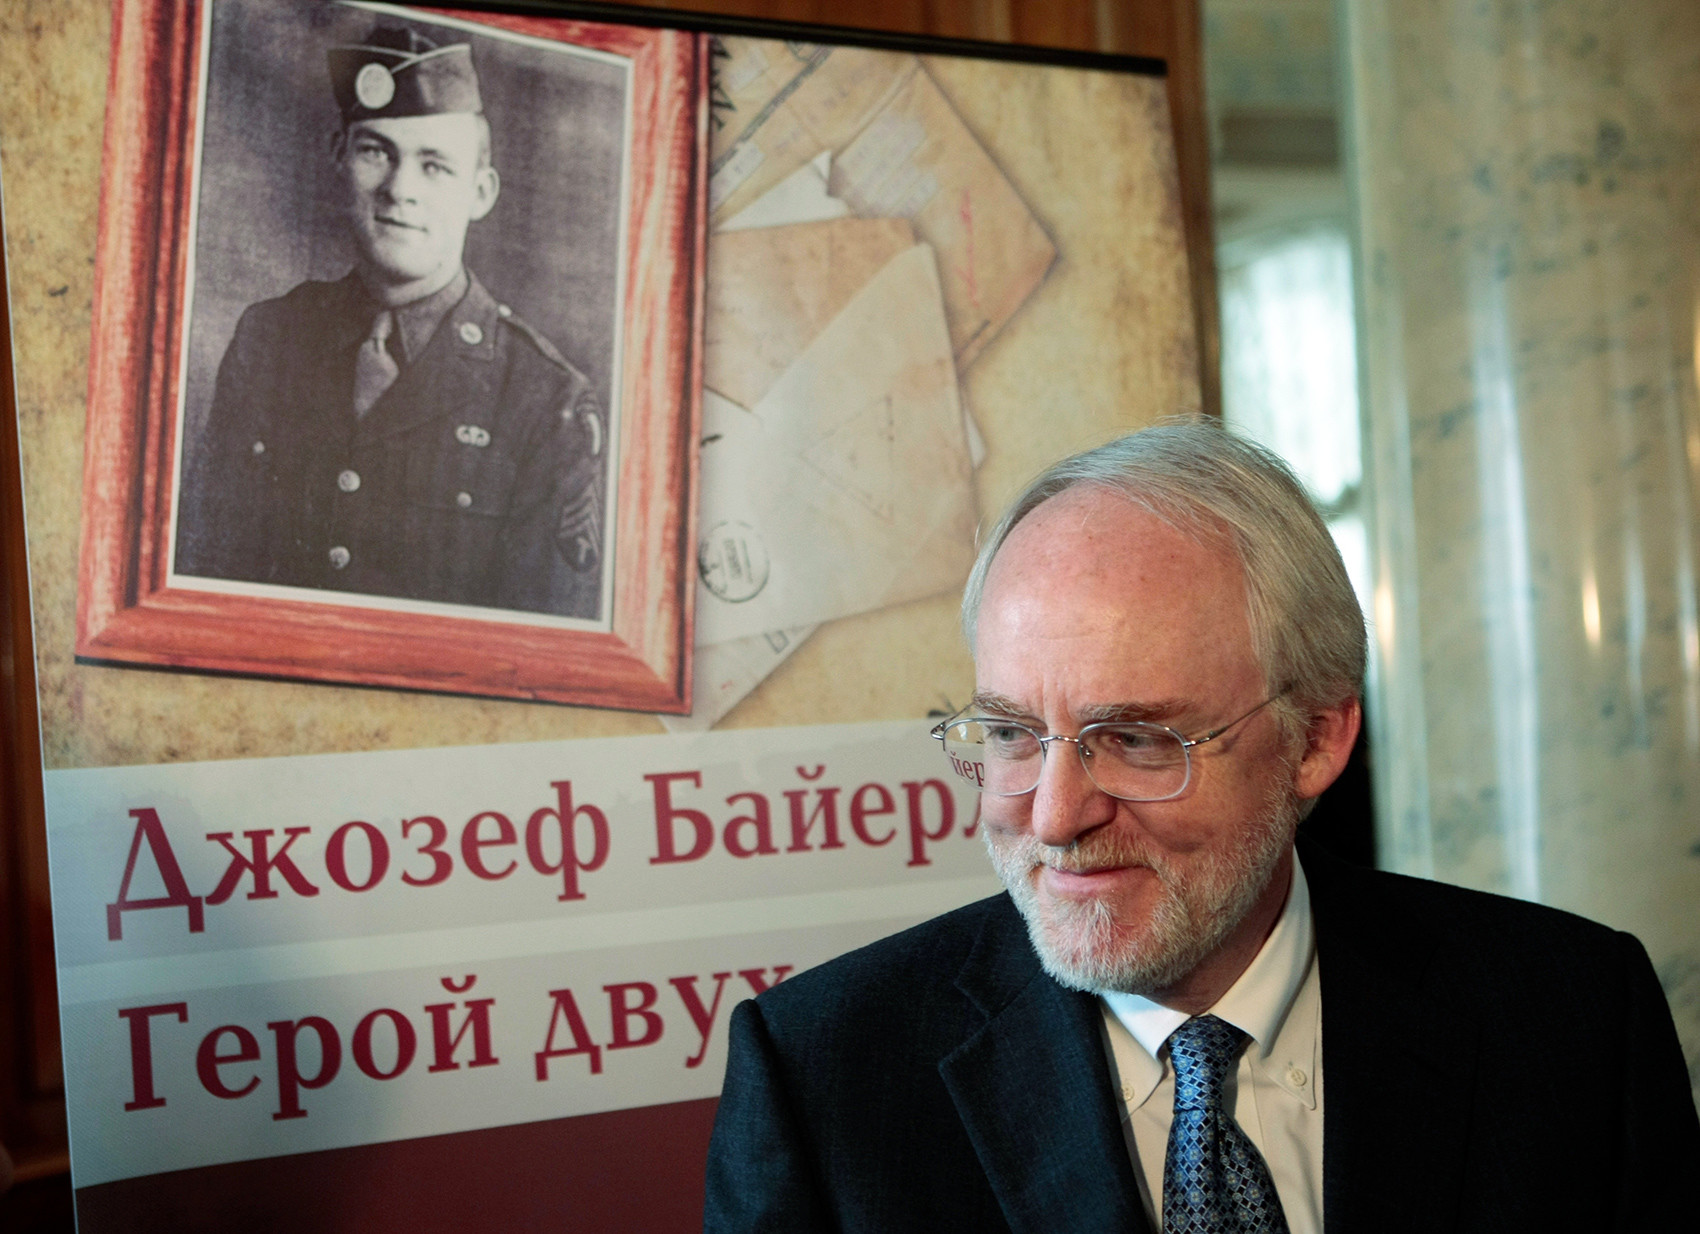 John Beyrle, Joseph's son, served as the U.S. Ambassador to Moscow from 2008 to 2012.